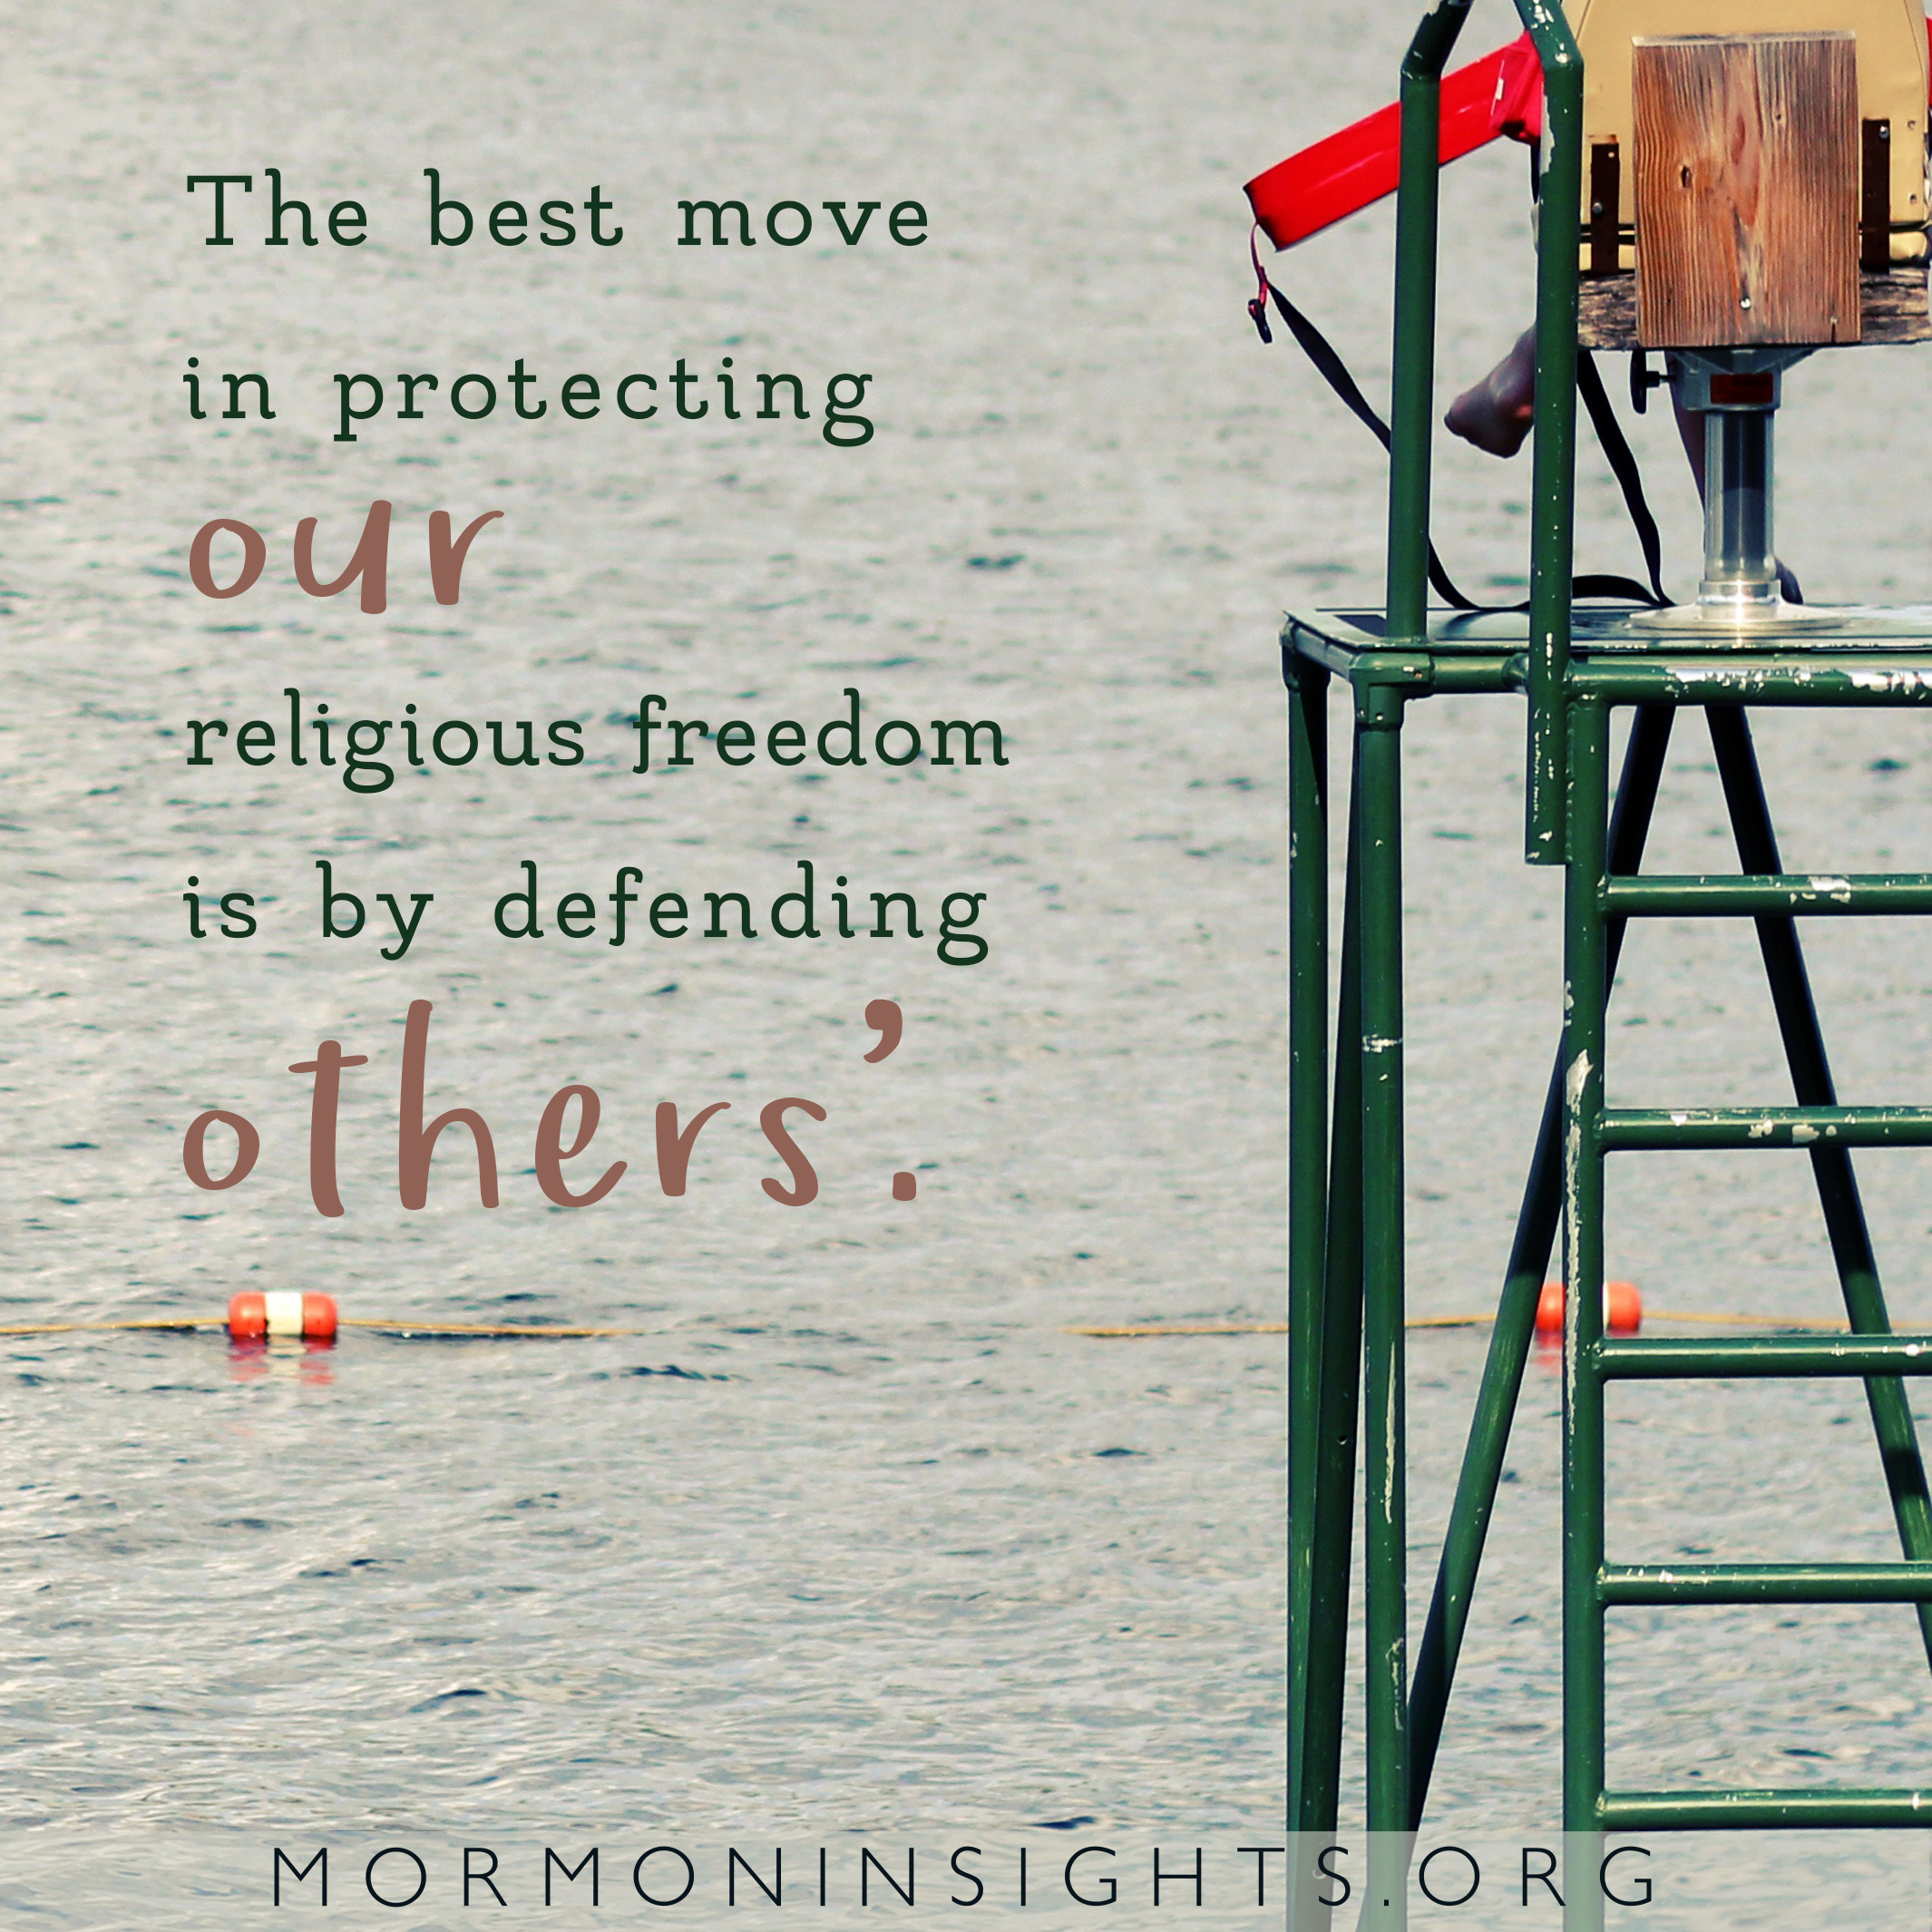 "The best move in protecting our religious freedom is by defending others'." mormon insights. Photo of lifeguard at a beach